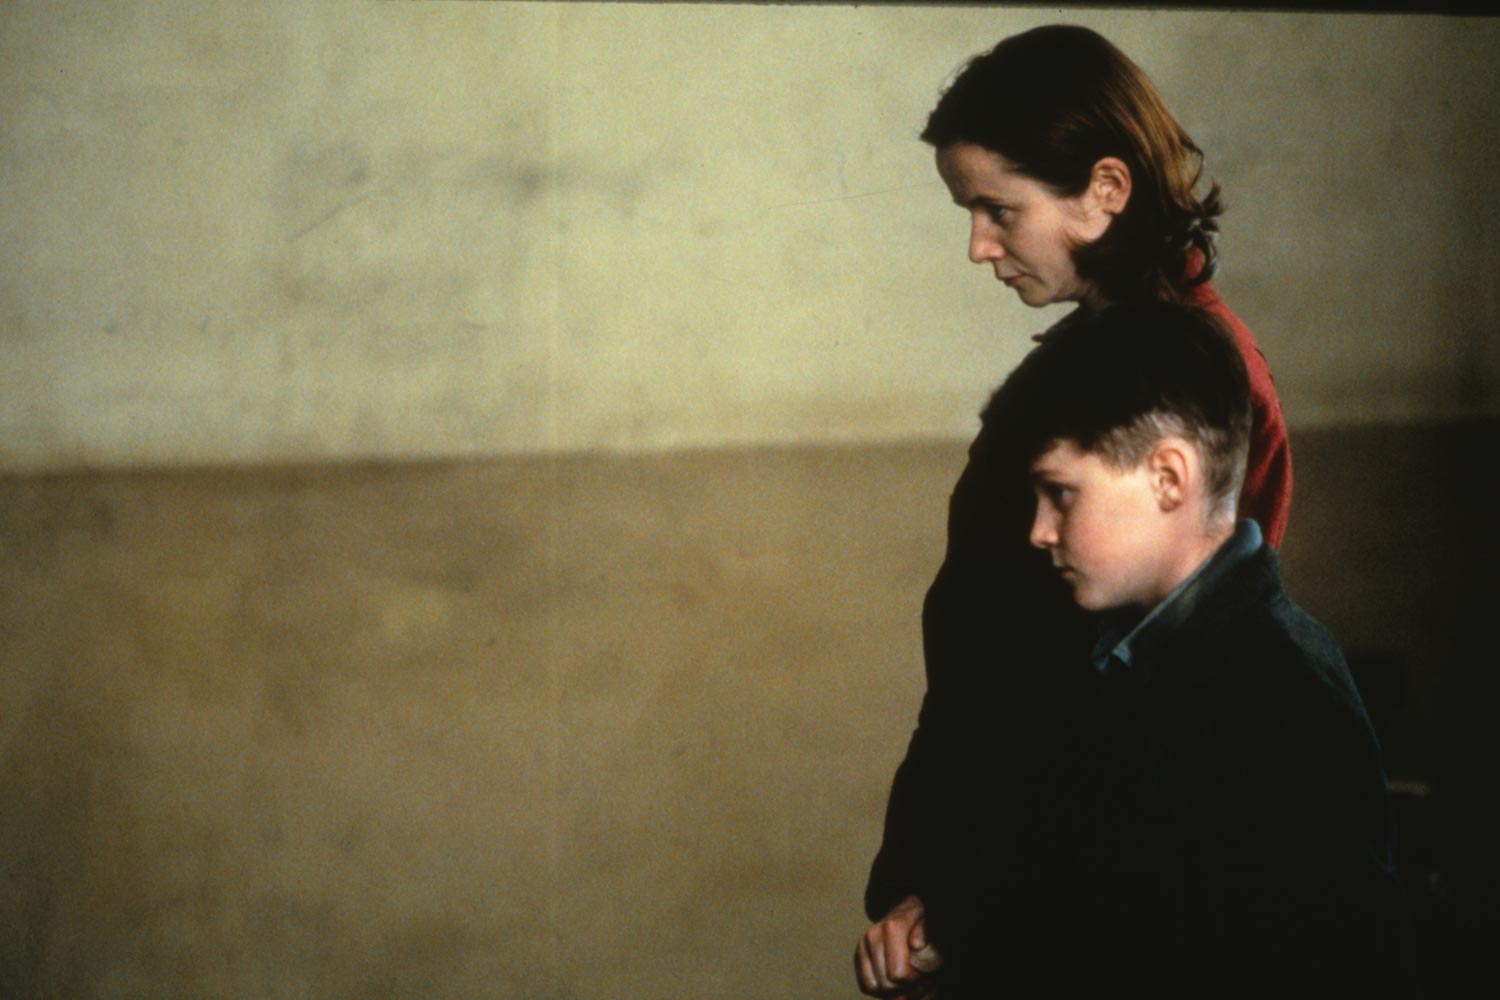 Emily Watson in scene from Angela's Ashes